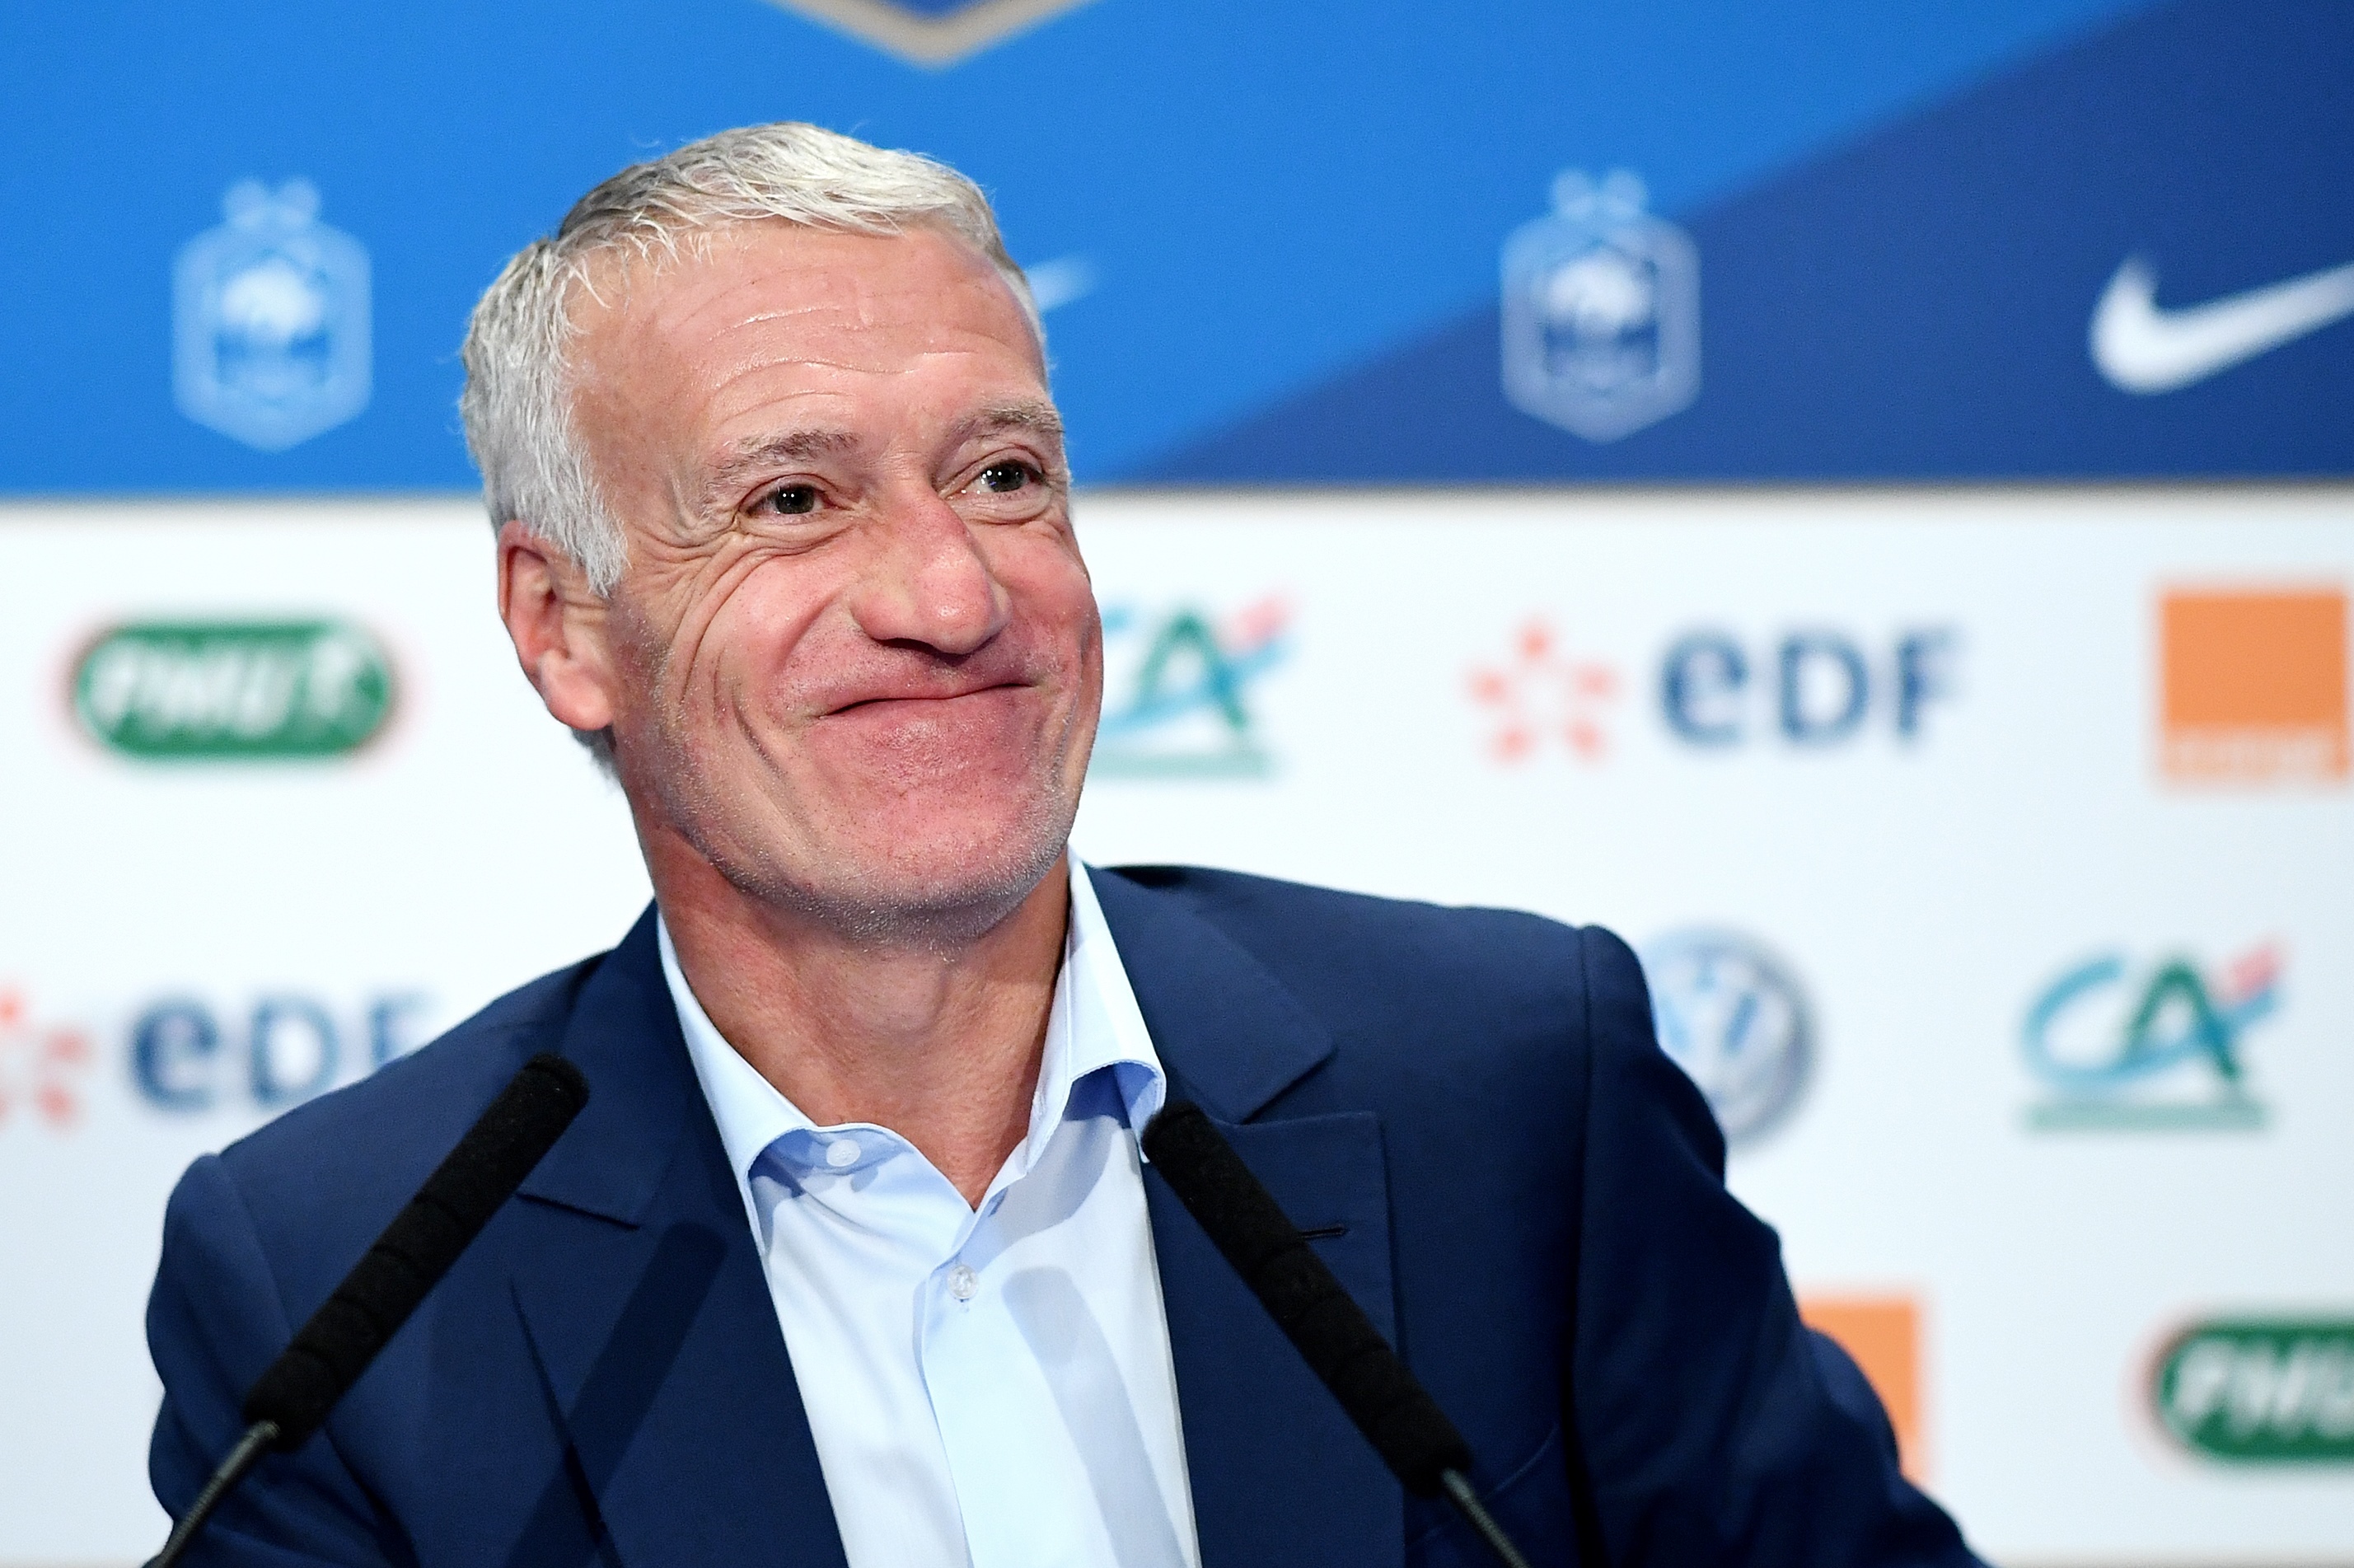 Didier Deschamps, a former Juventus and Chelsea midfielder as well as  ex-captain of the French team, waves during his official presentation as  new coach of Juventus soccer club, in Acqui Terme training